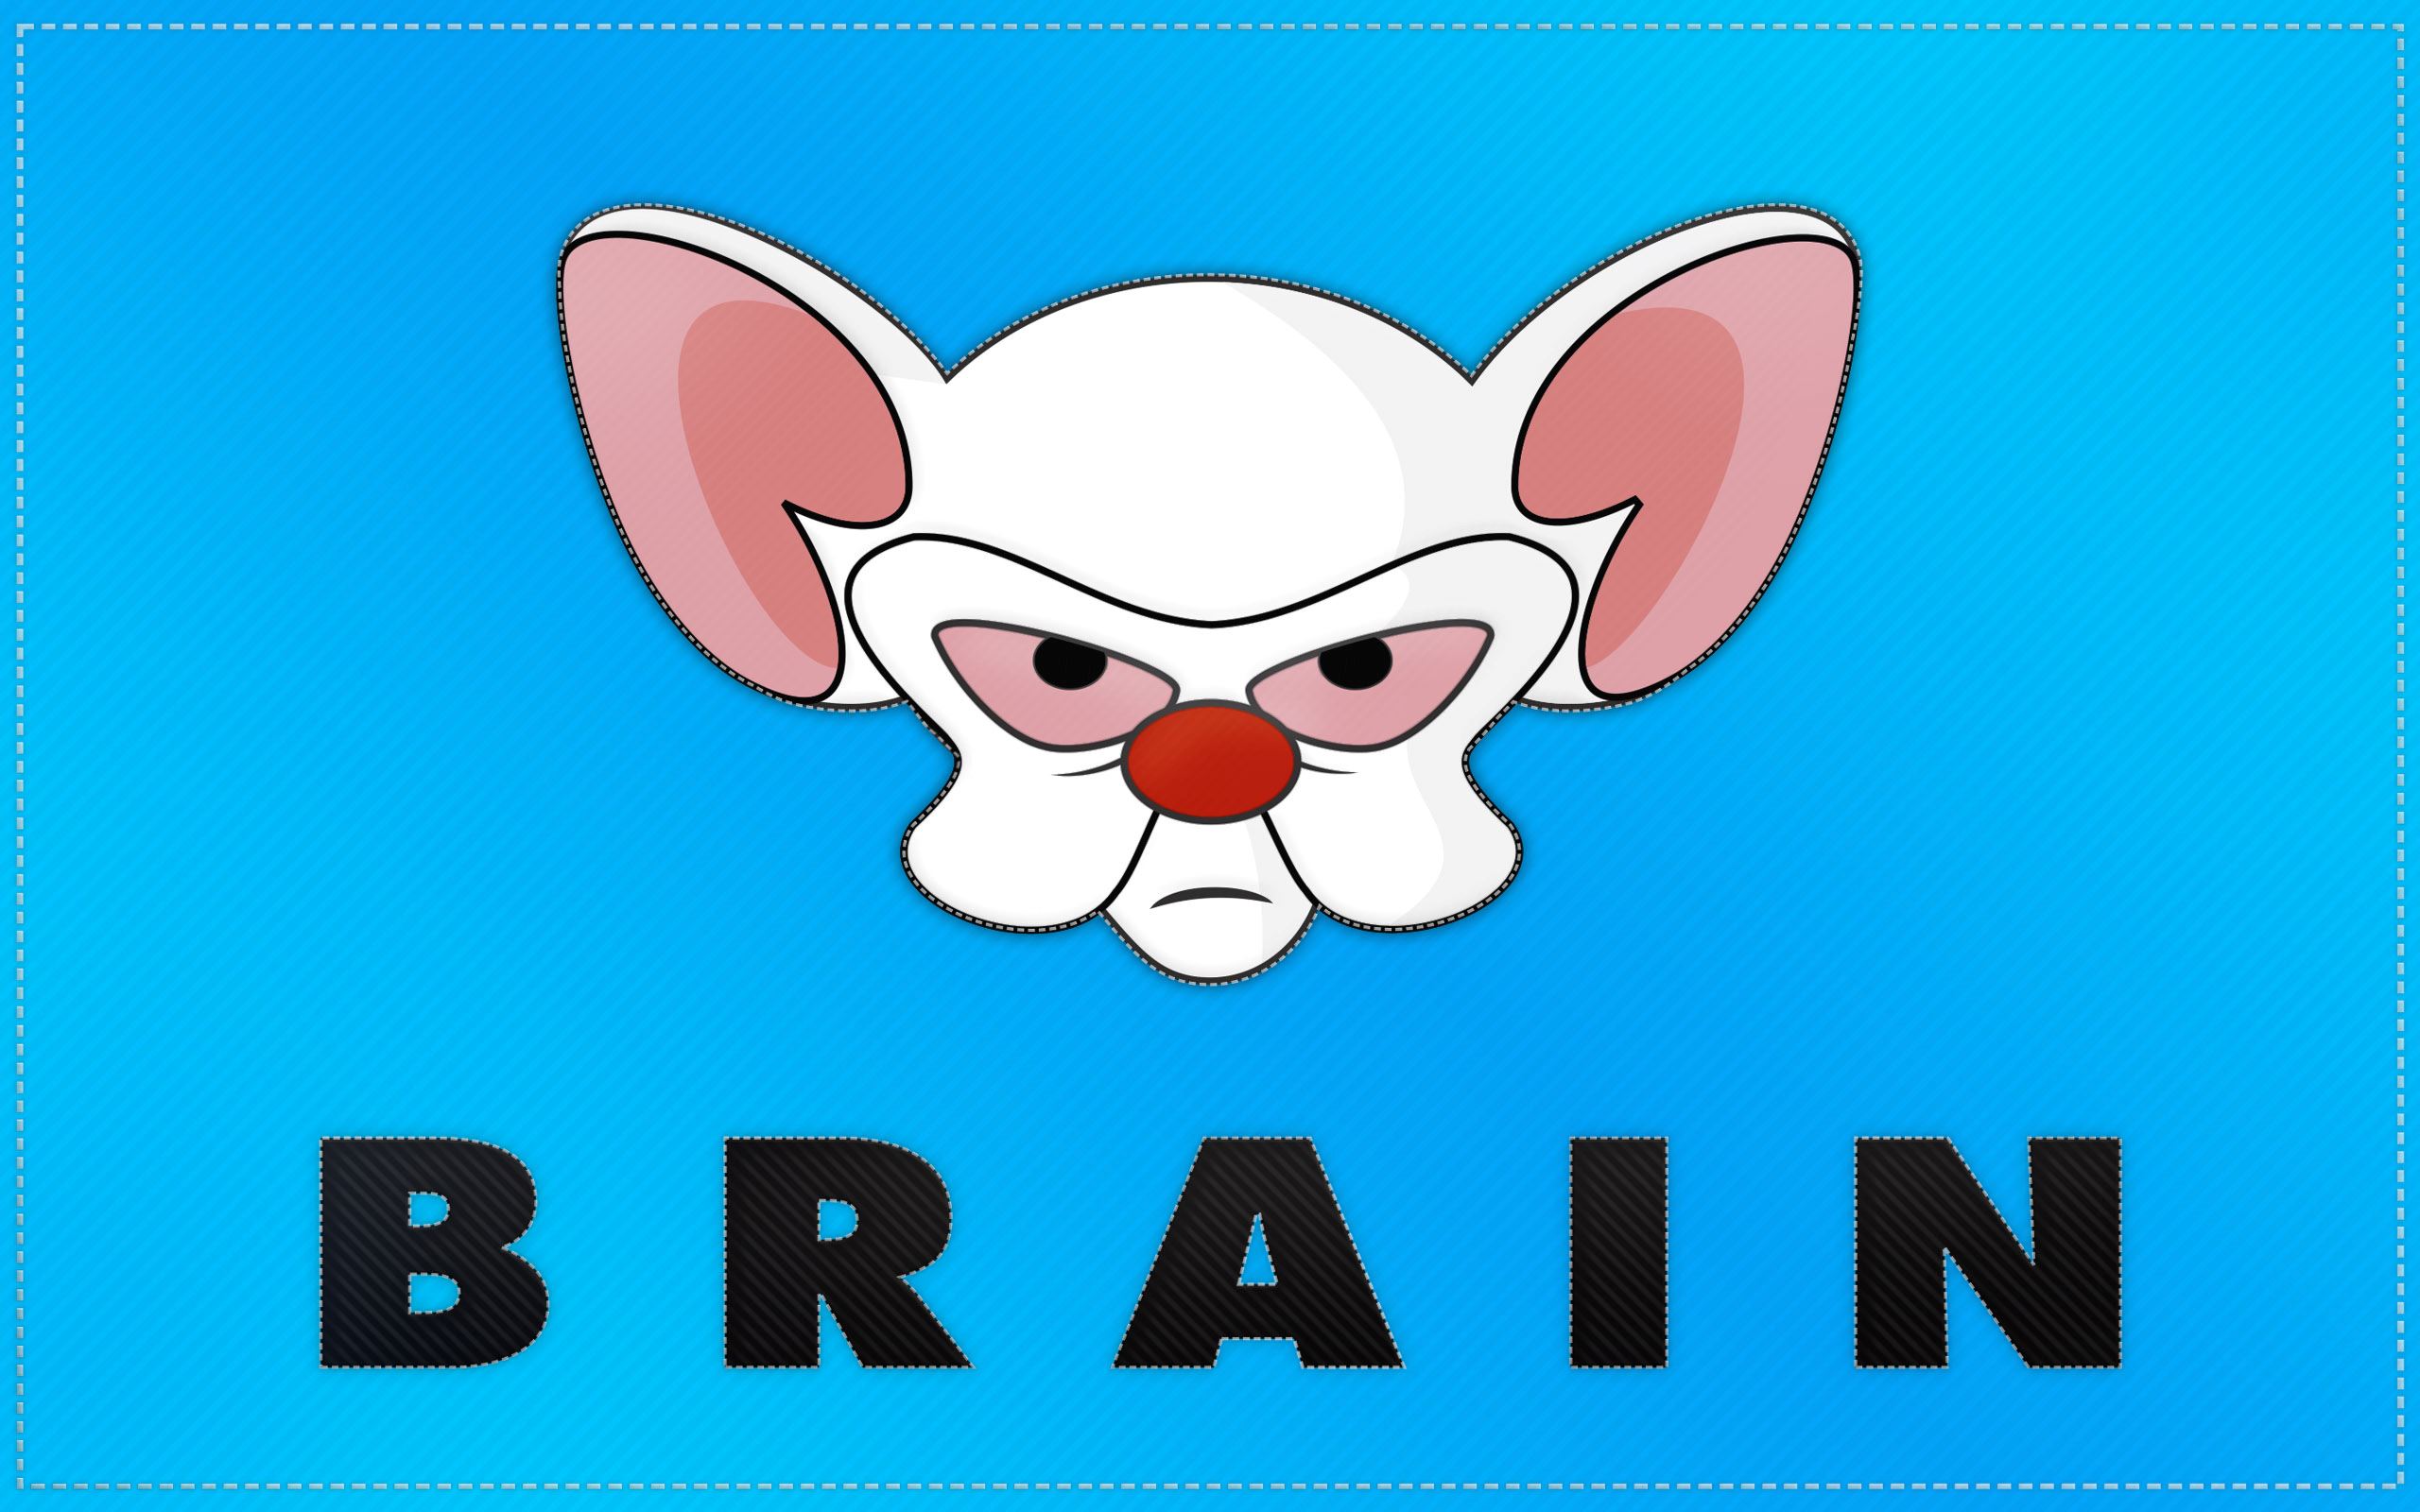 Pinky and the Brain (1995) -, Synopsis, Characteristics, Moods, Themes and  Related